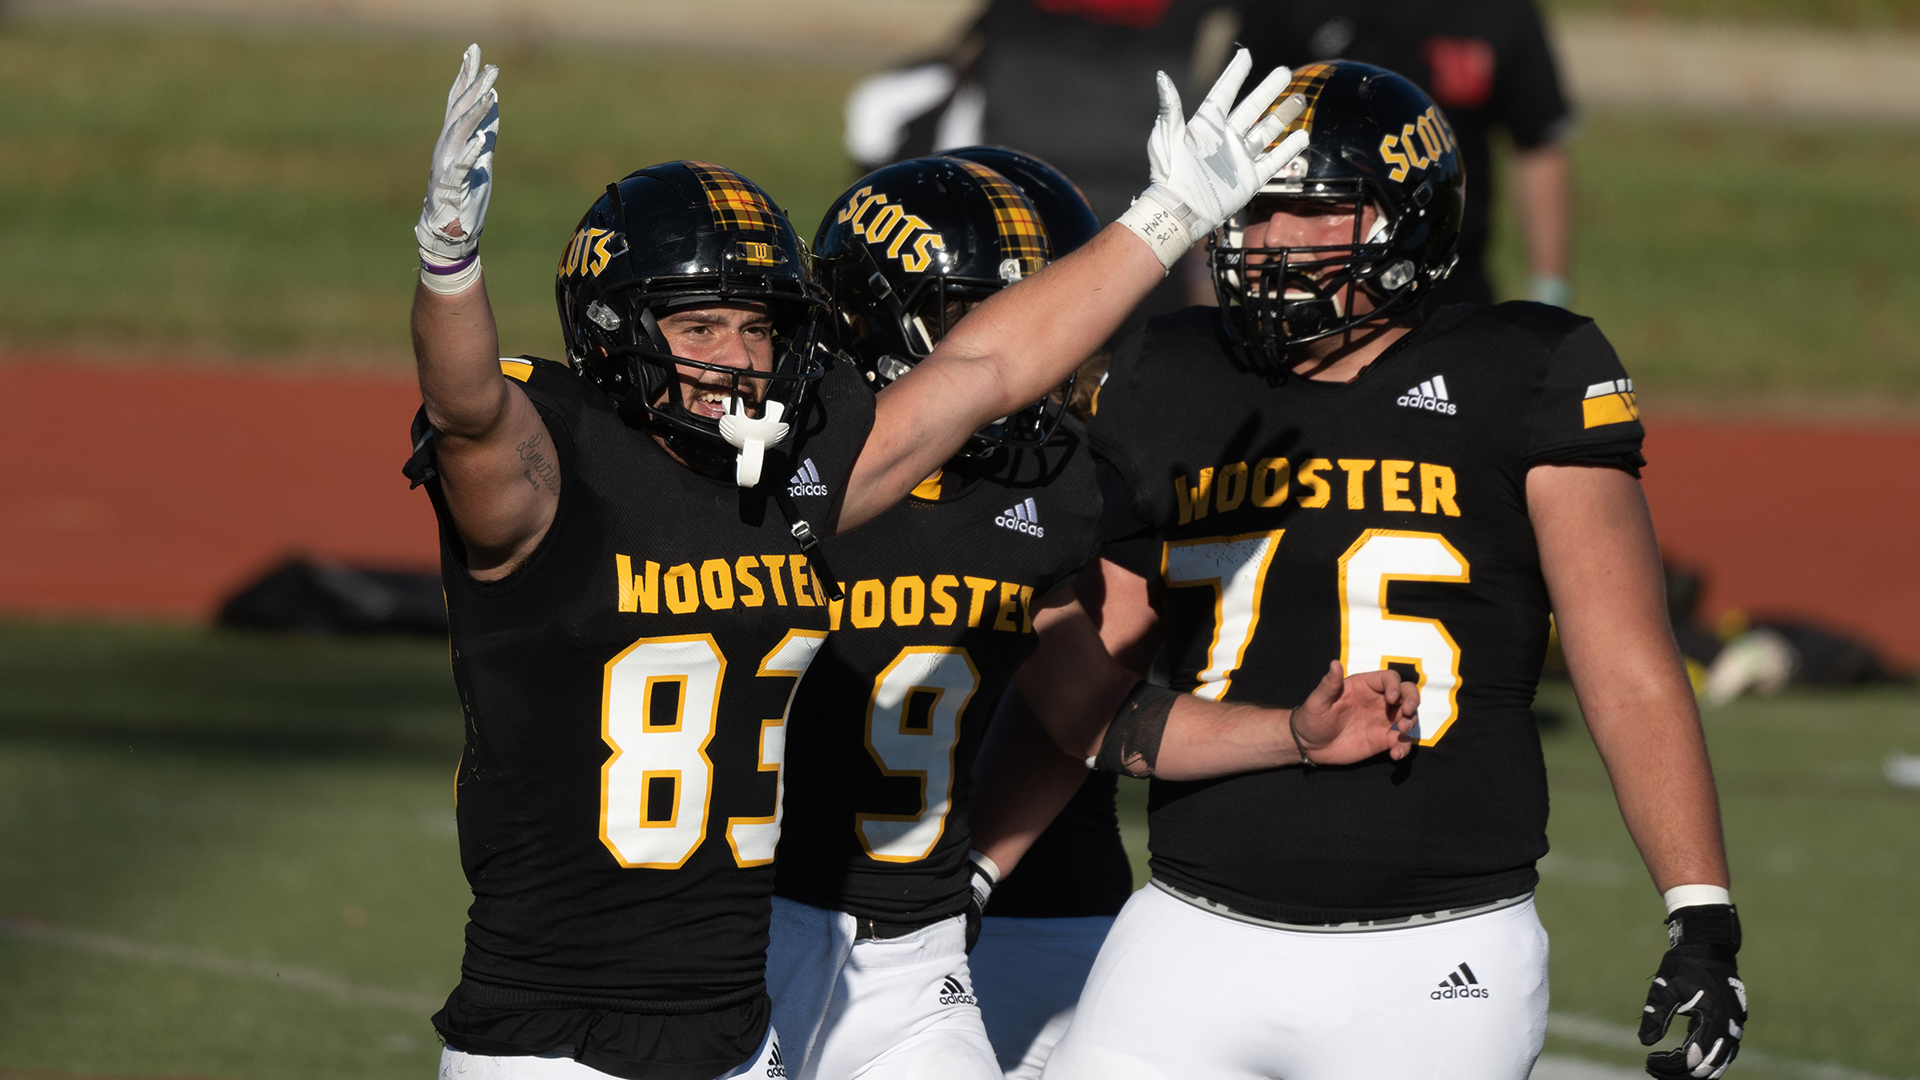 Cole Hissong, Wooster Football